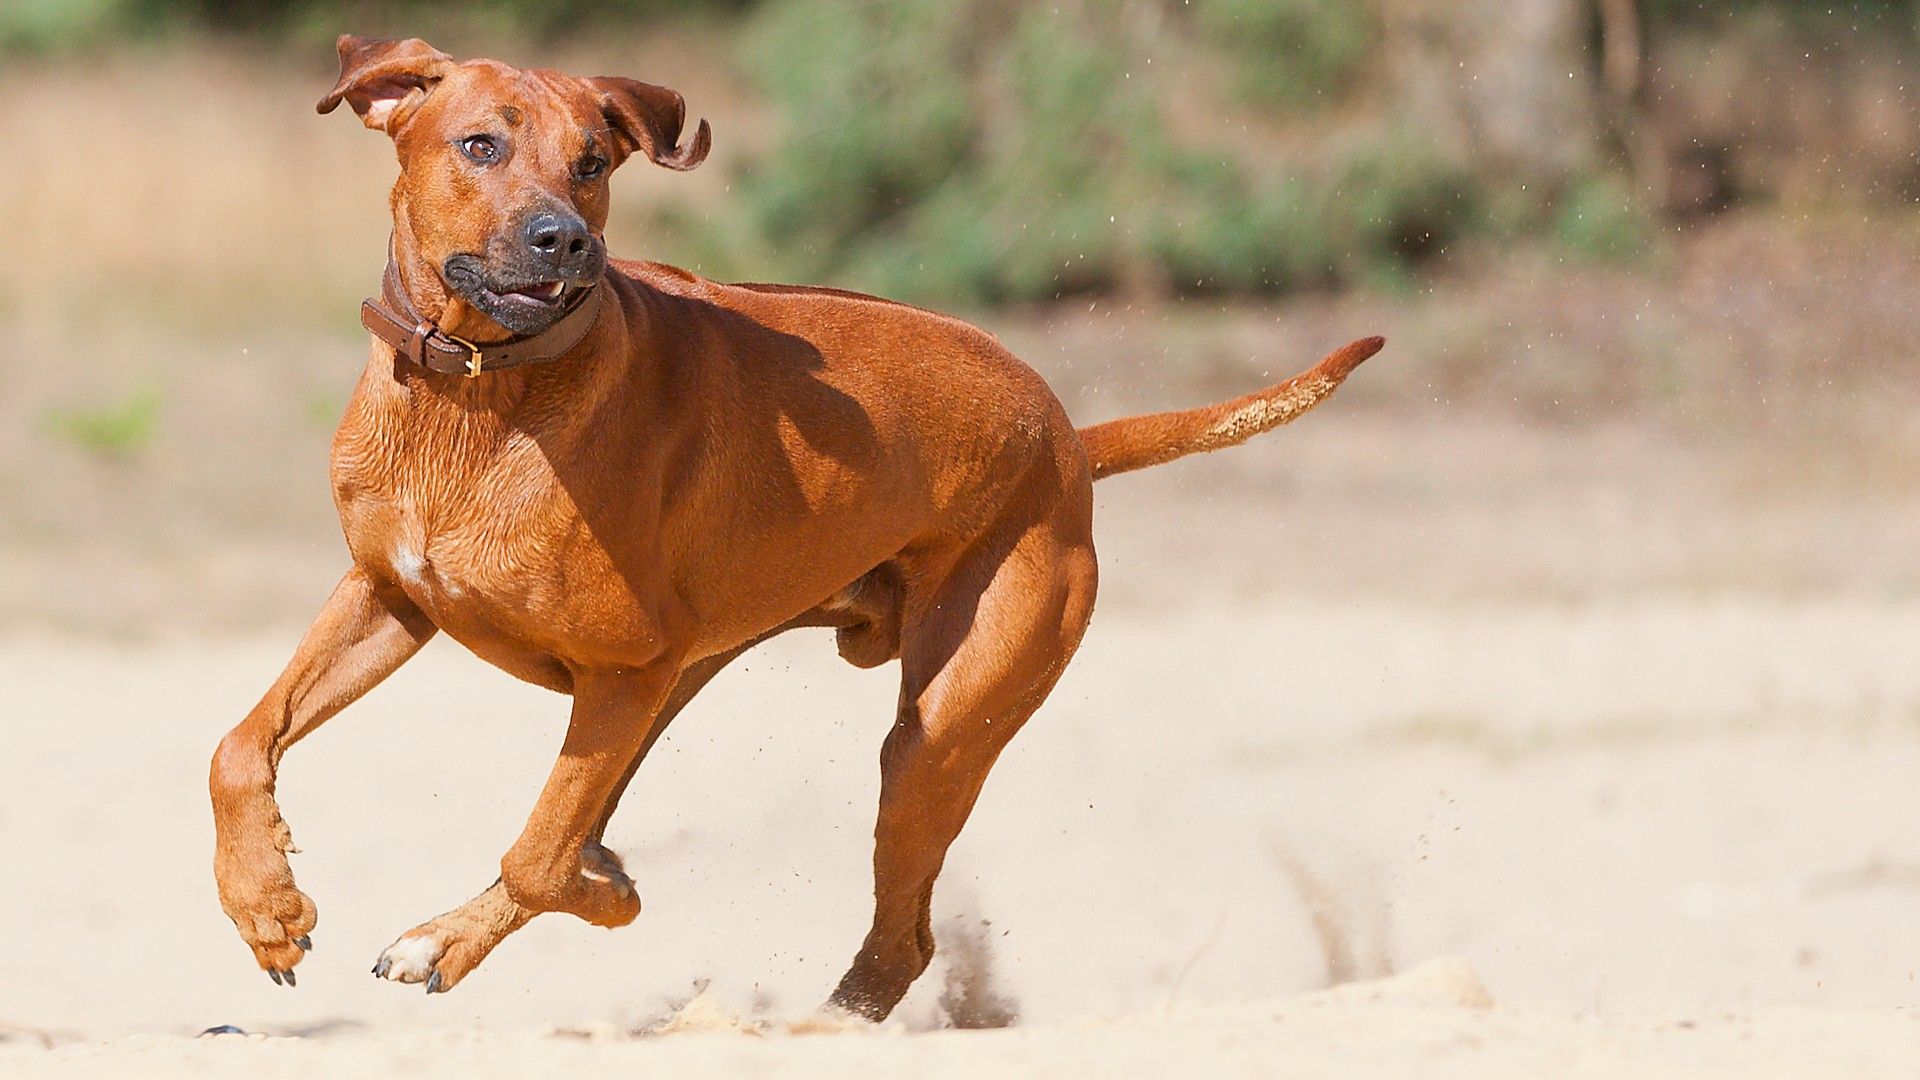 <p>                     The Rhodesian Ridgeback was bred to track lions in Africa and are fast and powerful athletes who are incredibly protective of their loved ones. Named for the distinctive ridge of hair that grows in the opposite direction down their back, this pup can have a threatening presence at times but they are very gentle at heart.                   </p>                                      <p>                     Highly intelligent and easy to train, they’re super agile and make great outdoor companions regardless of the activity. A popular choice amongst runners and hikers, the Rhodesian Ridgeback has a tendency to be strong-willed and independent, so they do require a firm but fair hand.                   </p>                                      <p>                     That being said, once they know that you’re the boss, this loving and affectionate dog will be the most faithful of friends, making wonderful playmates for children and one of the best exercise companions you could ask for.                   </p>